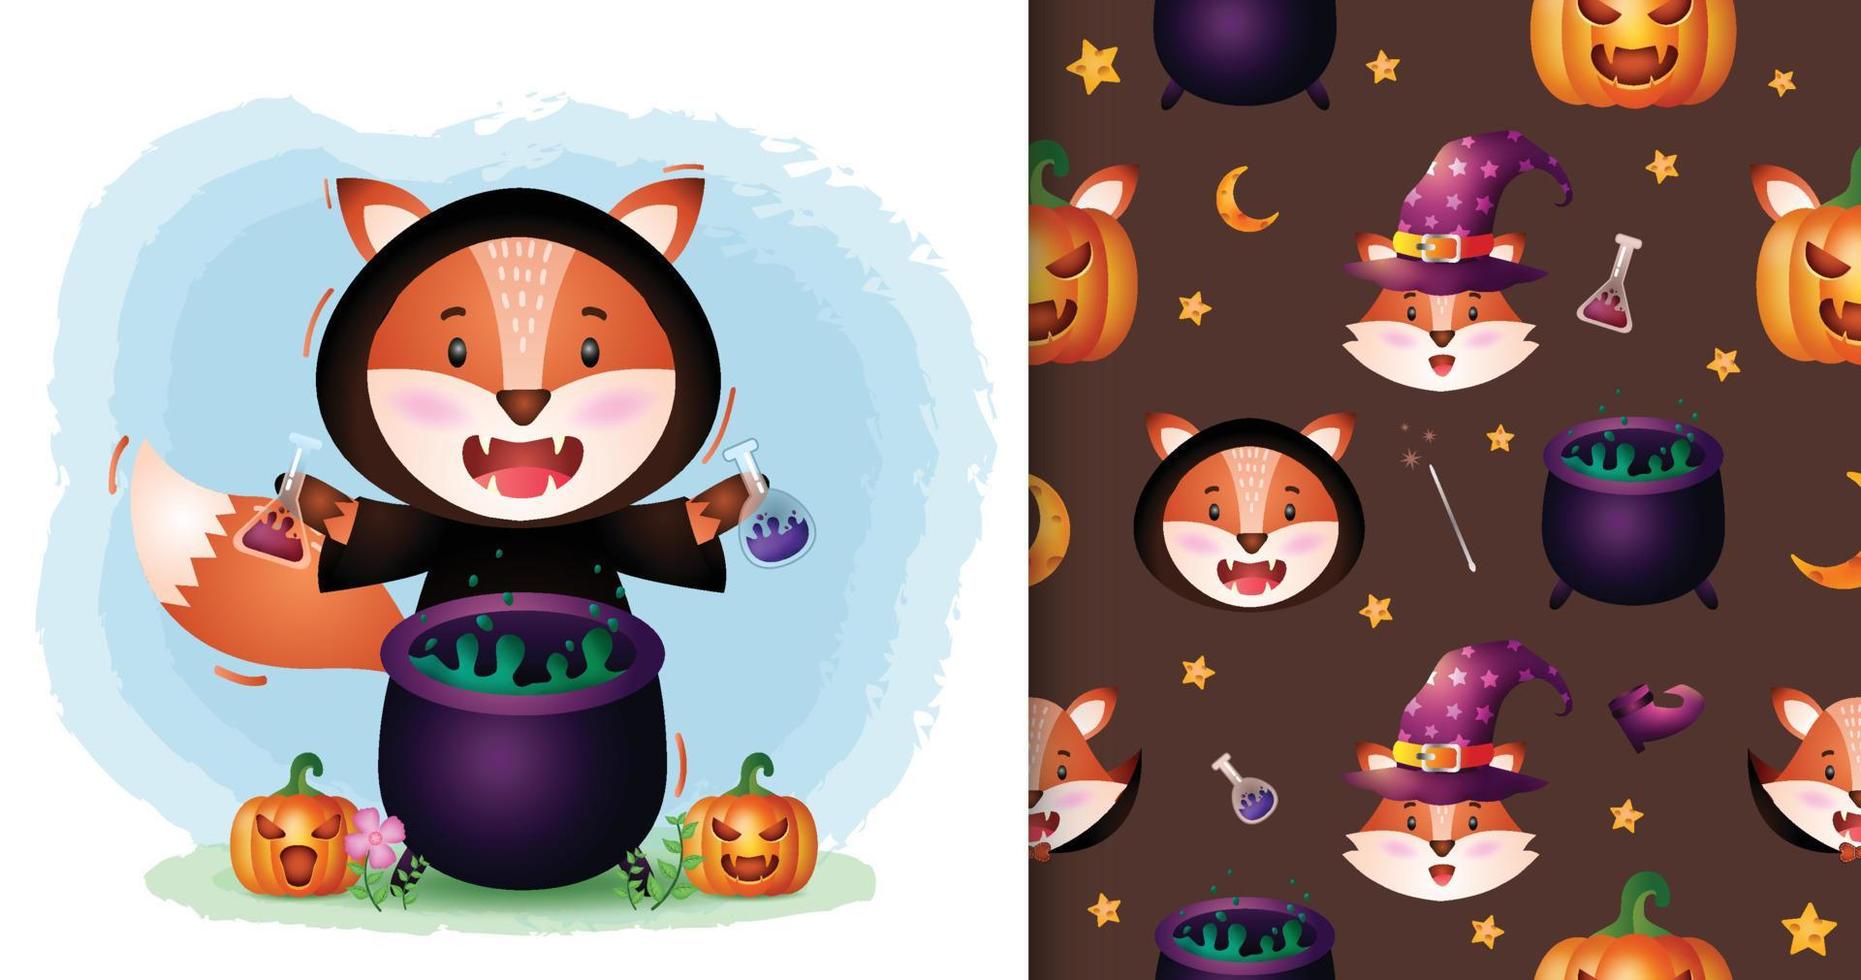 a cute fox with witch costume halloween character collection. seamless pattern and illustration designs vector